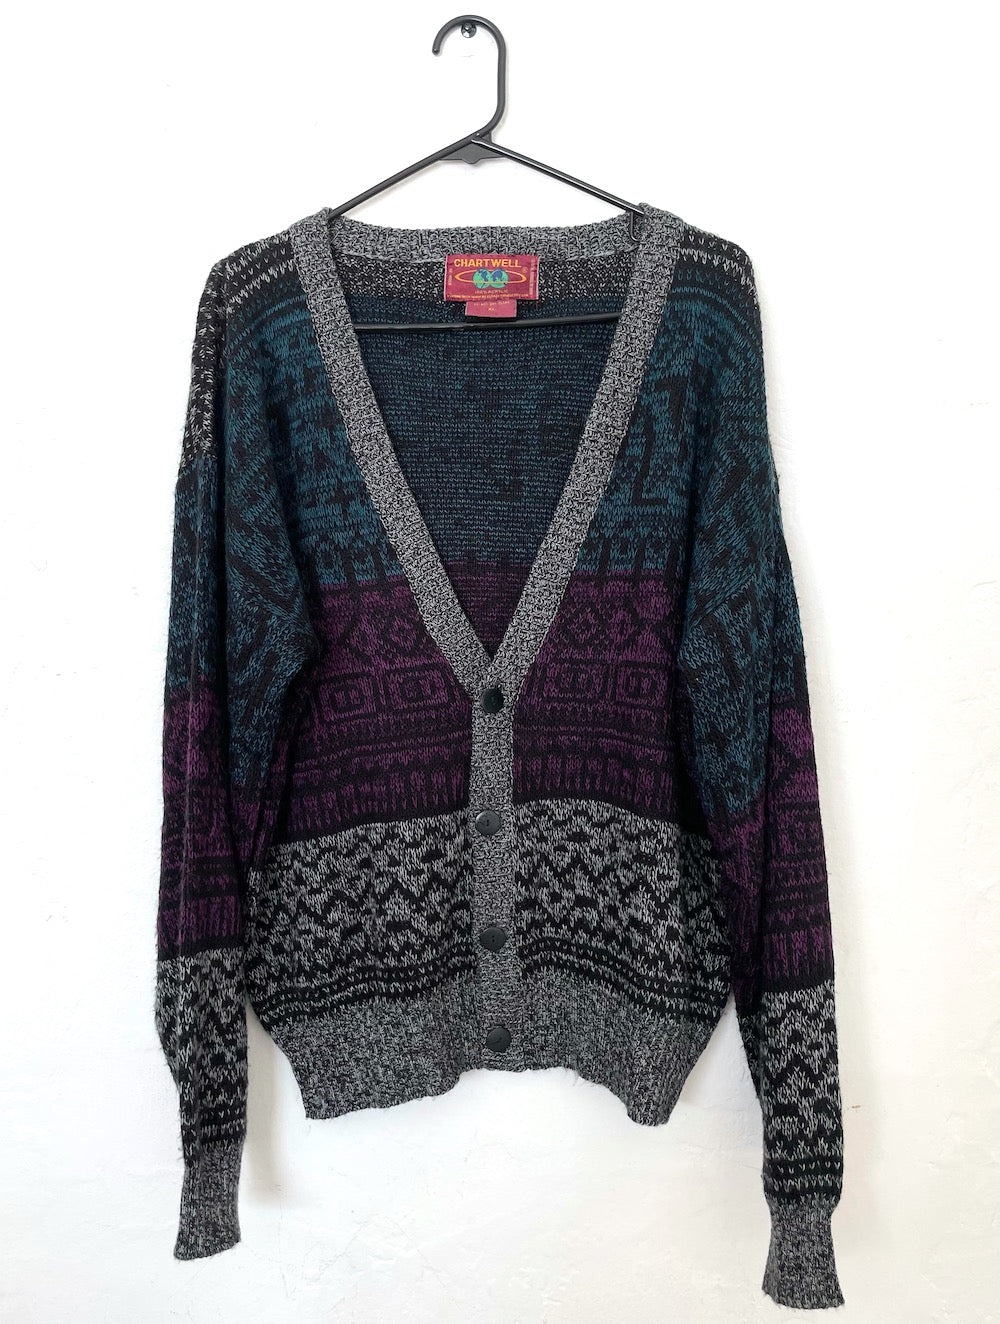 Vintage 90s Purple and Teal Printed Cozy Knit Cardigan